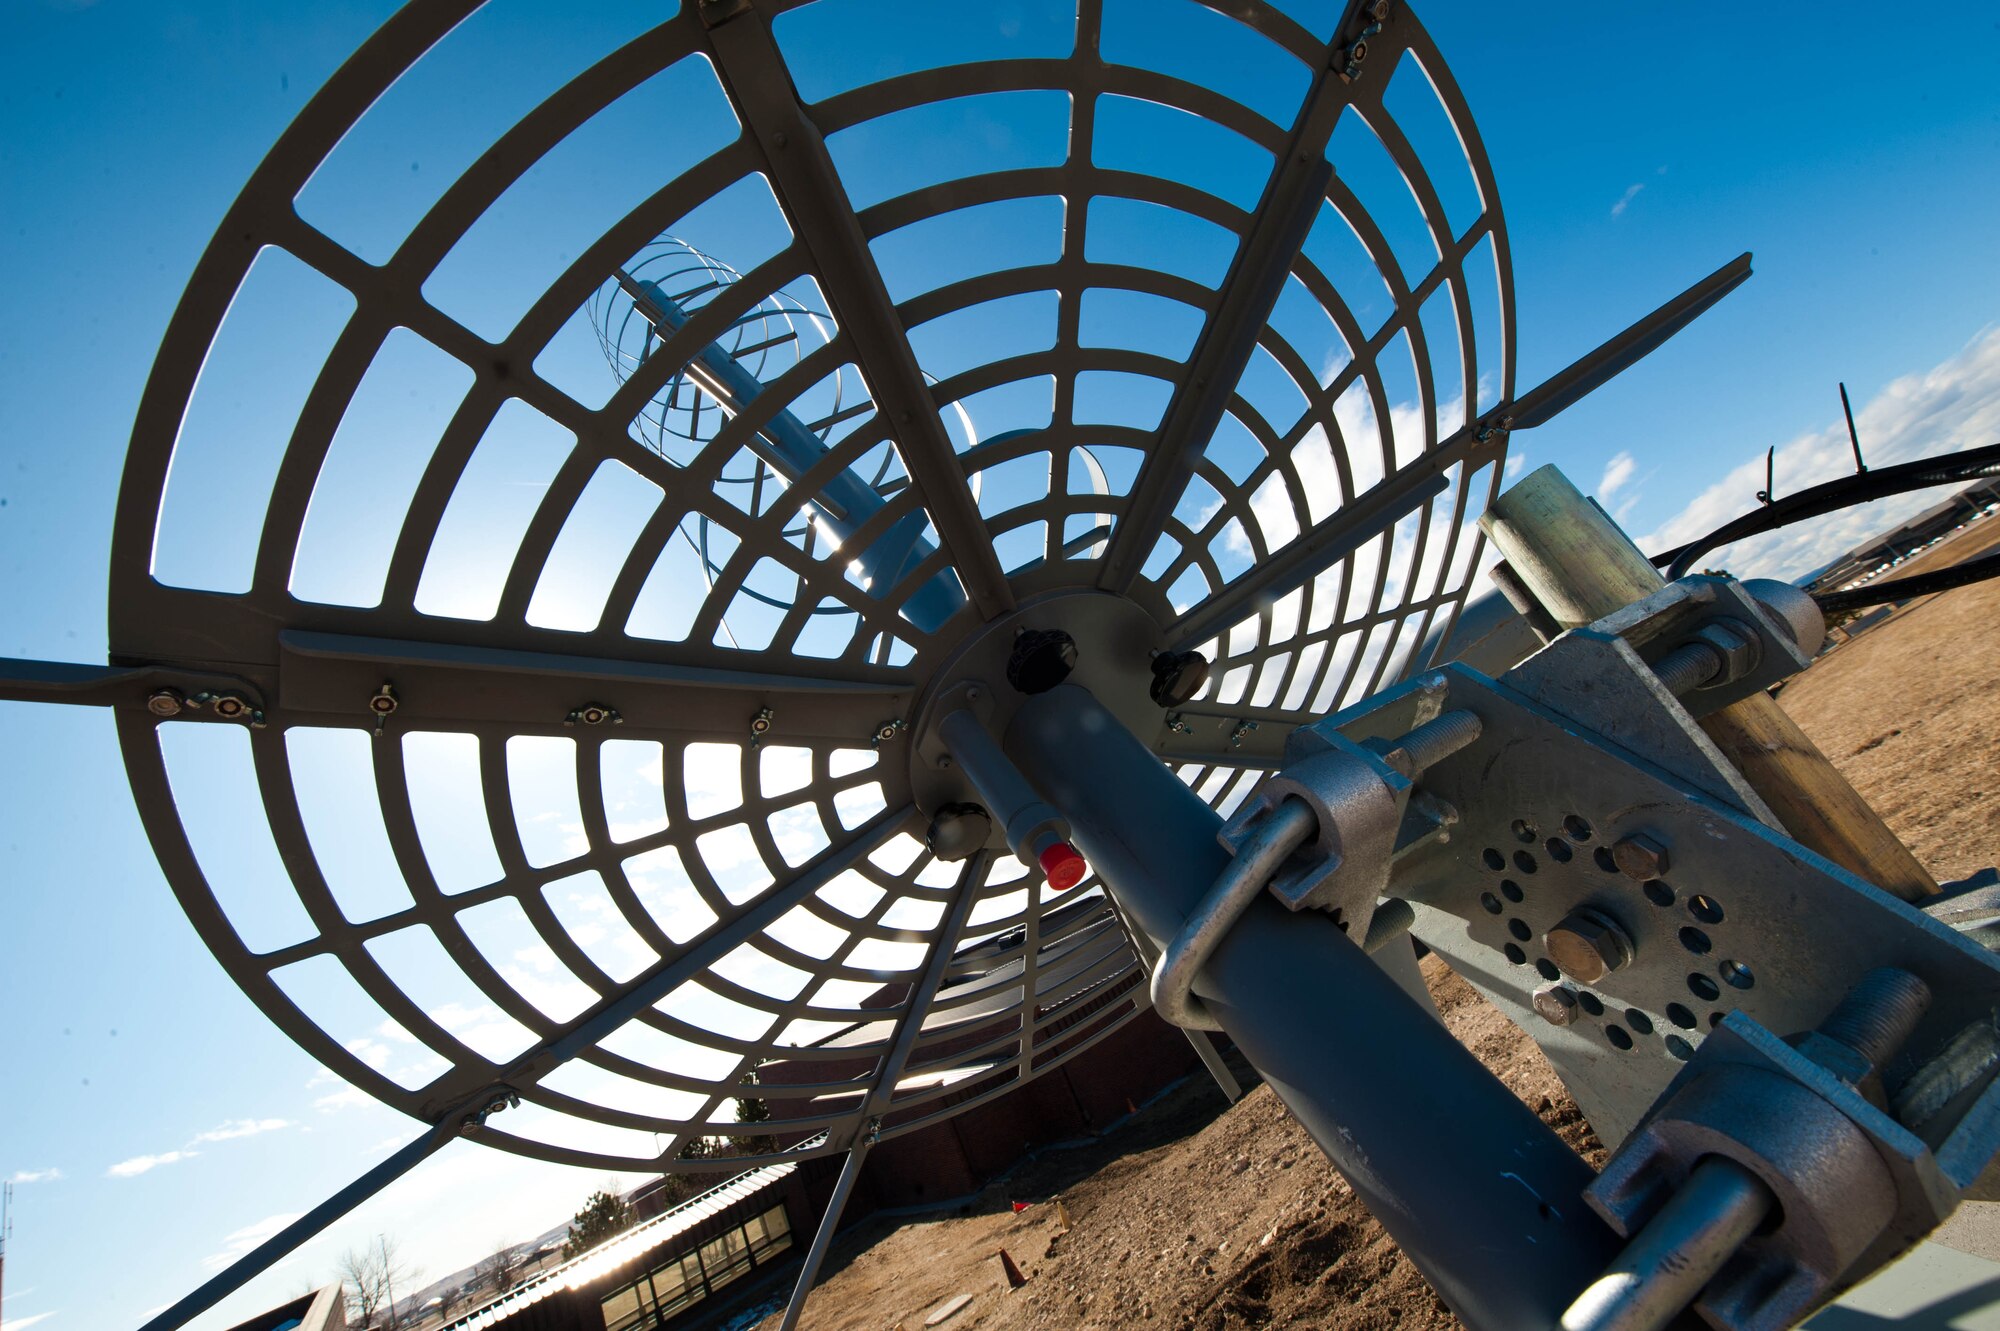 A new helical antenna is installed to replace a temporary antenna being used by the 28th Operation Support Squadron to provide optimal satellite communication capabilities at Ellsworth Air Force Base, S.D., Feb. 13, 2012. The helical antennas are built to withstand extreme weather conditions with dielectric rods along the mast, while the ground plane is backed with reinforcing ribs into which tubular axial rods are placed to increase the diameter of the ground plane. (U.S. Air Force photo by Airman 1st Class Zachary Hada/Released)